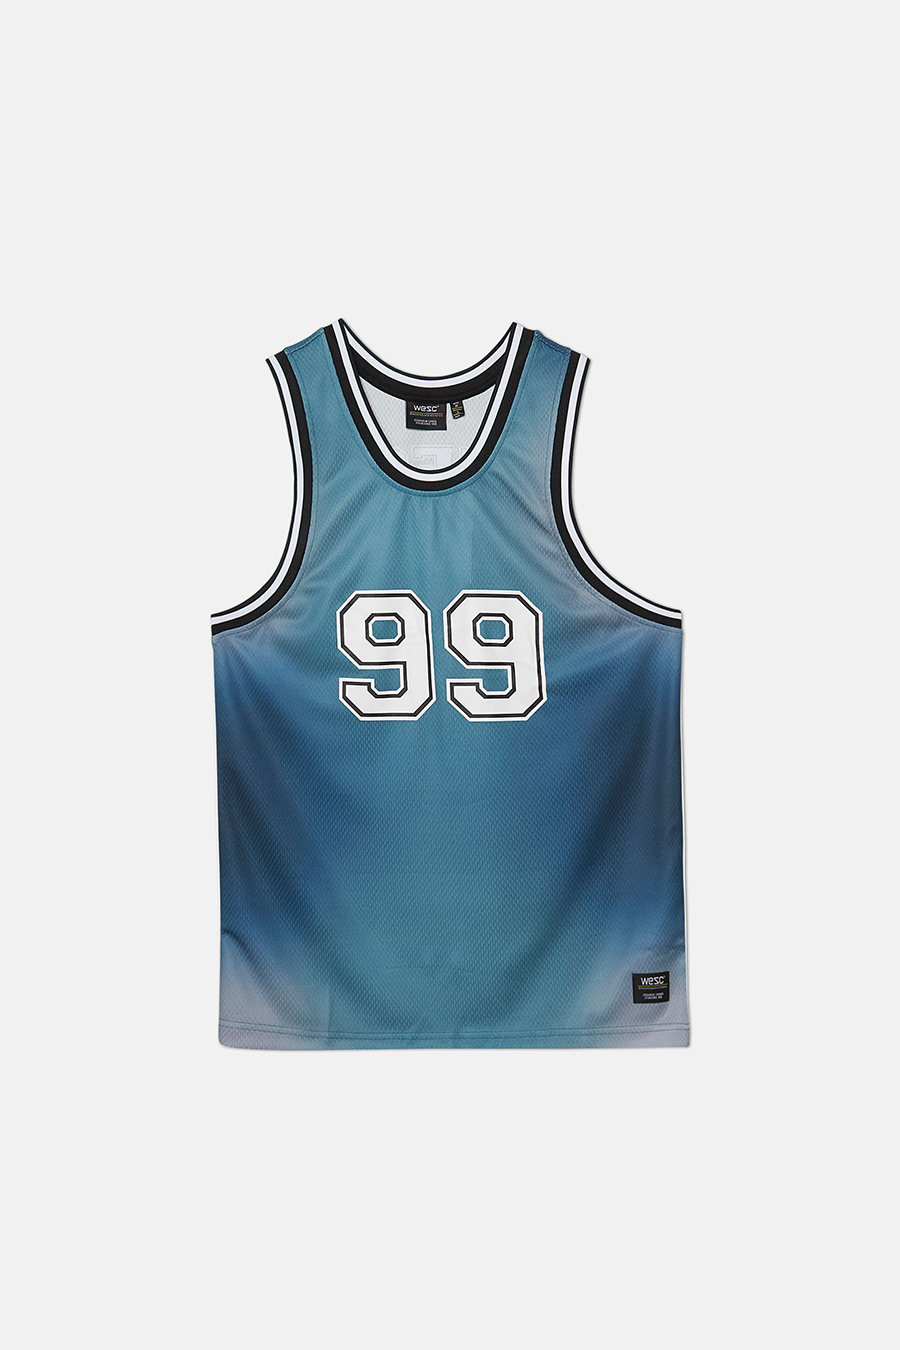 Basketball Tank Gradient | Dusty Teal - Main Image Number 1 of 2